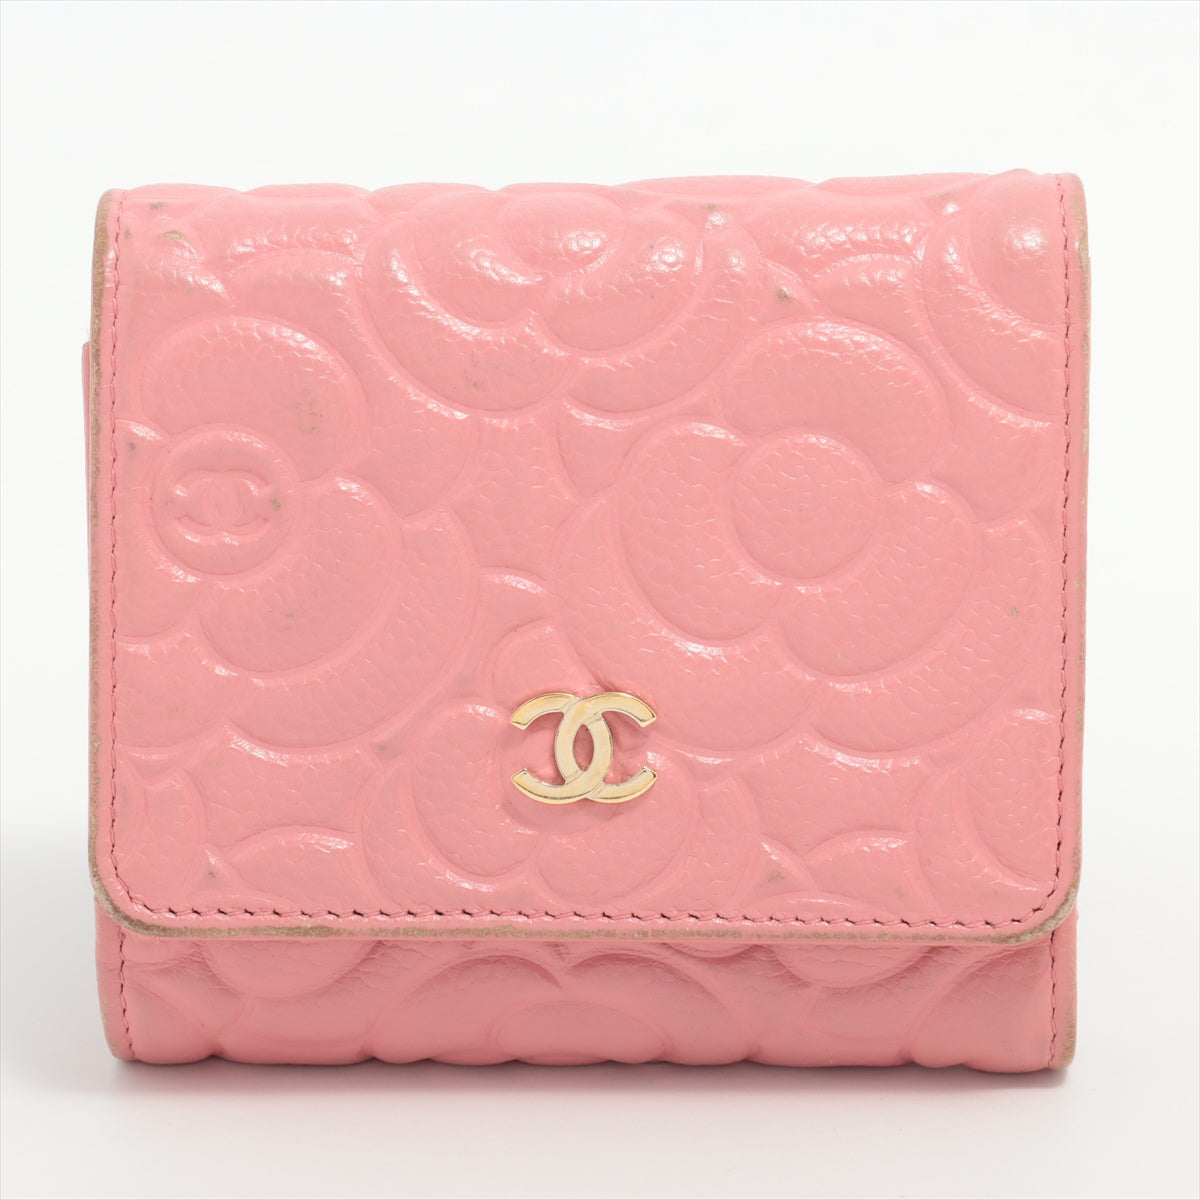 Chanel Camelia Caviarskin Compact Wallet Pink Gold Metal fittings 29th